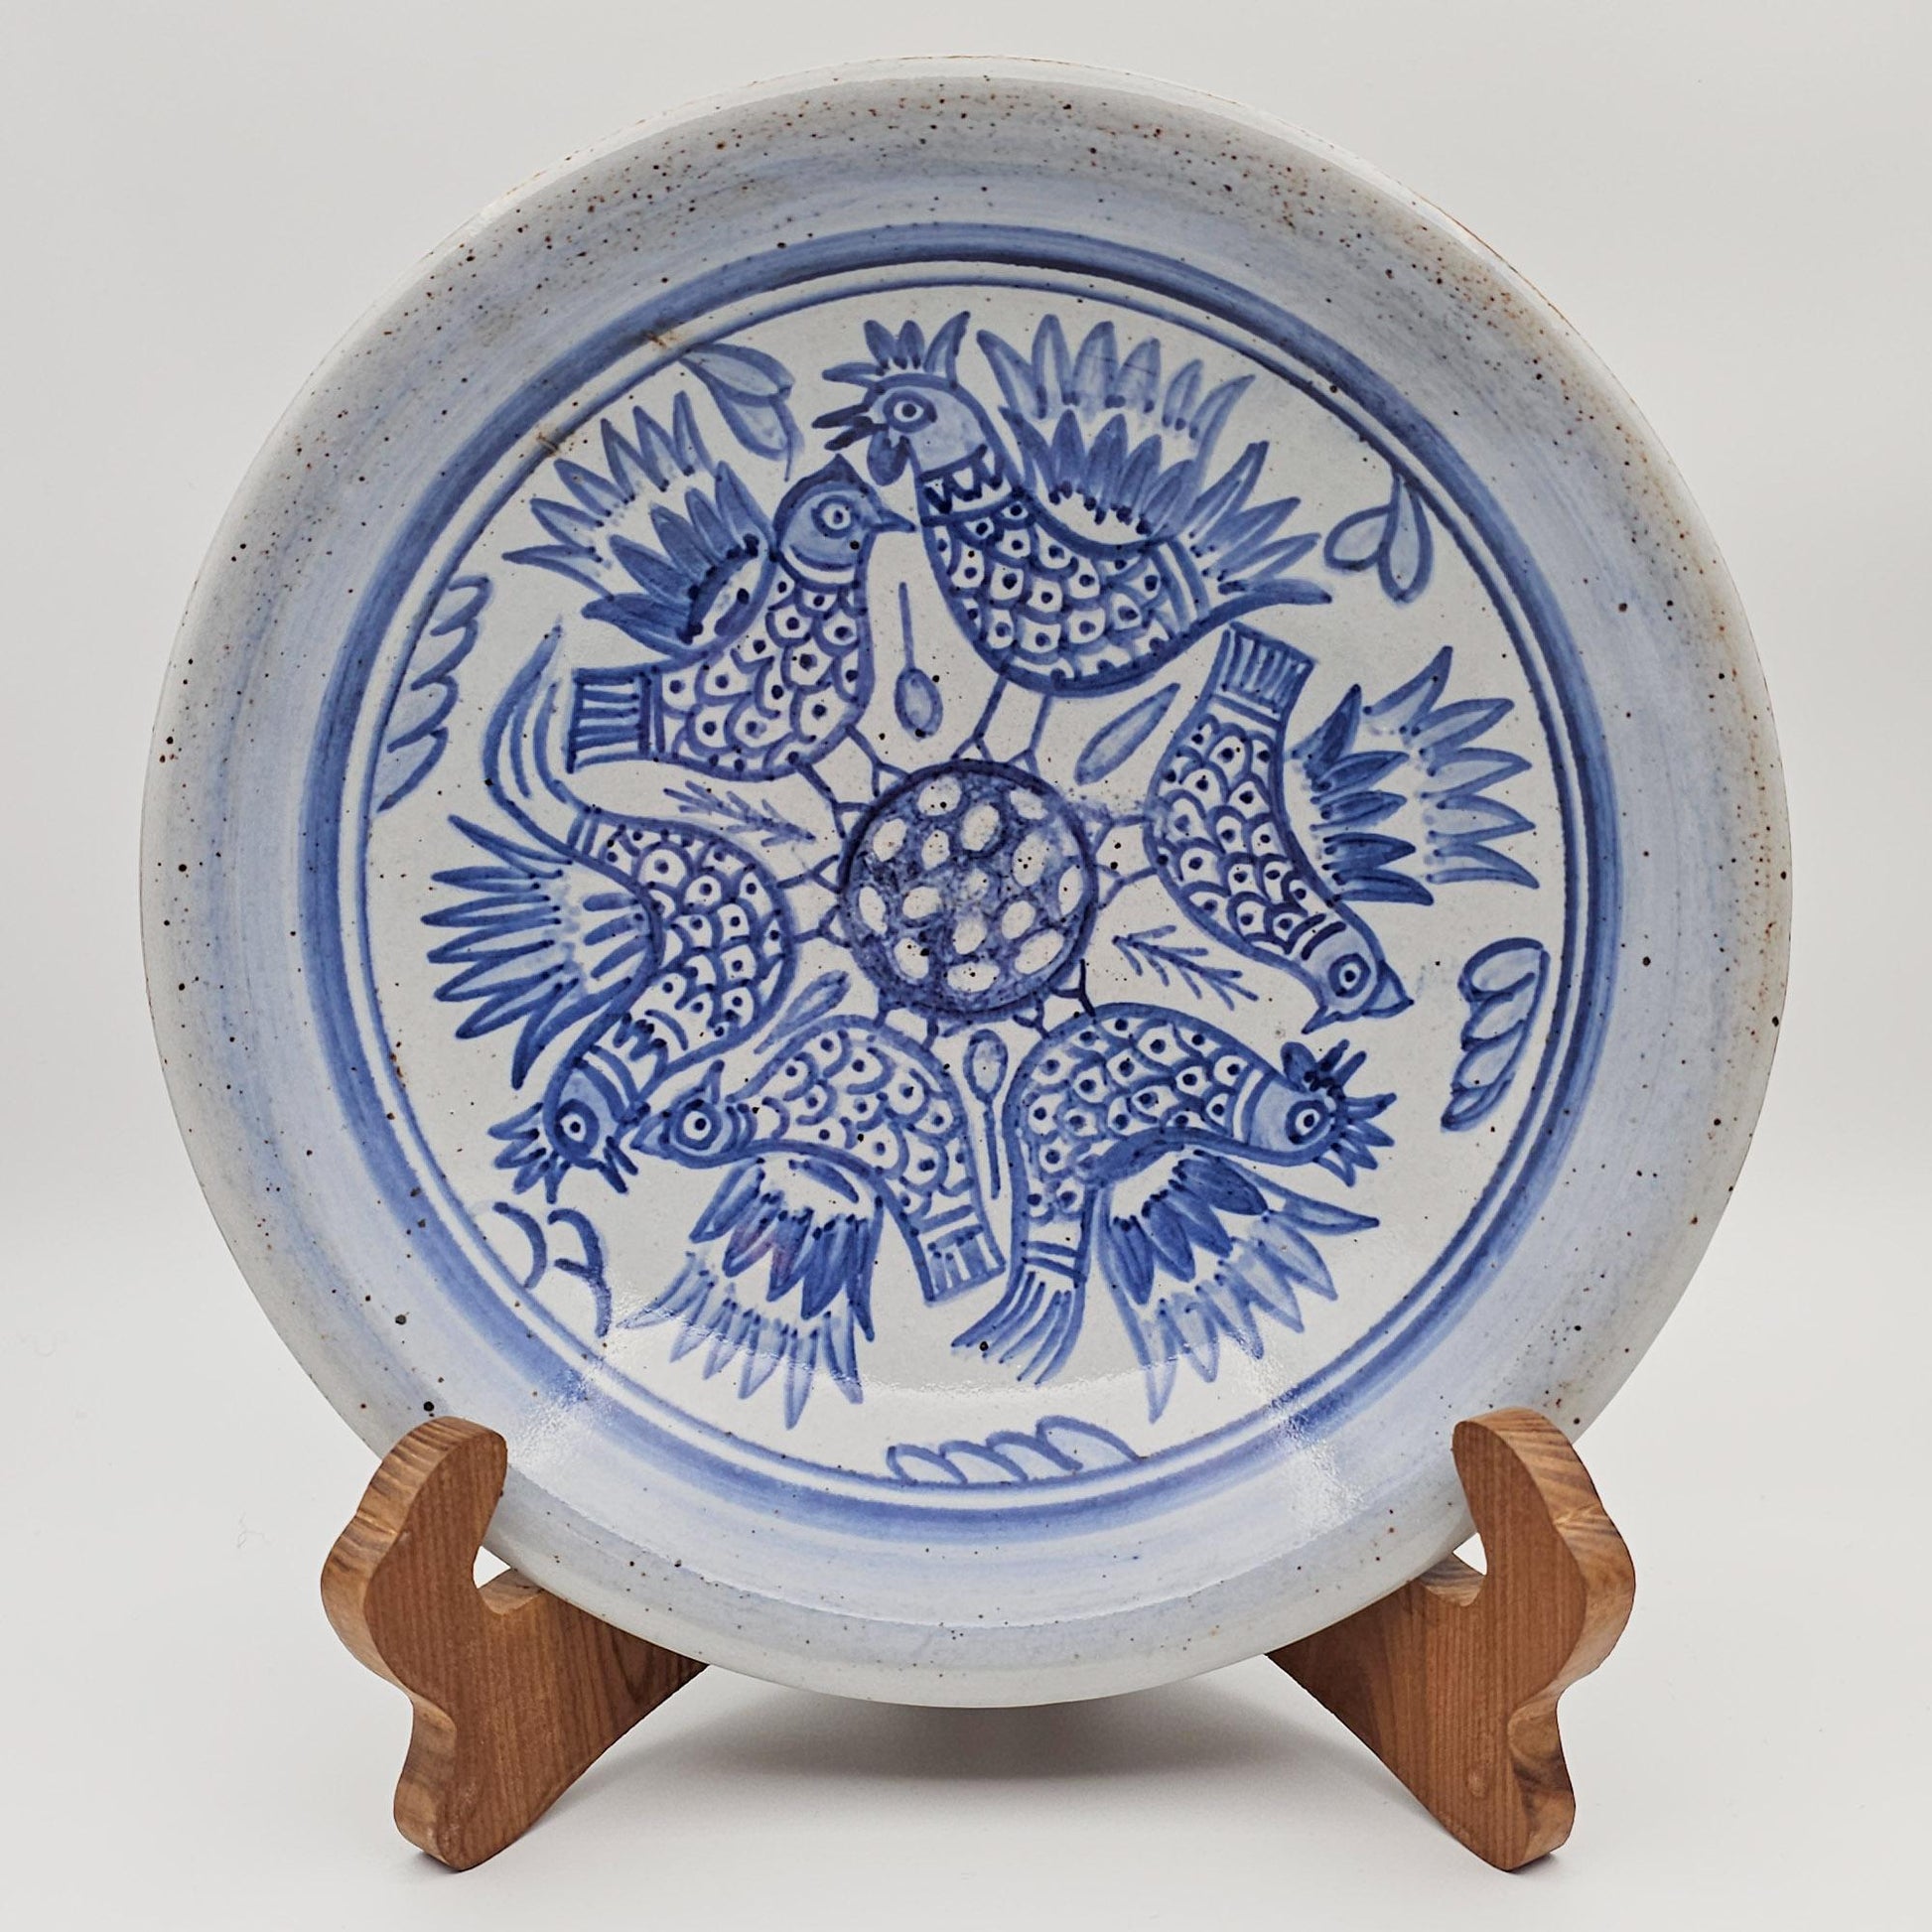 L. HJORTH Blue Roosters and Hens Decorated Stoneware Dish Mollaris.com 